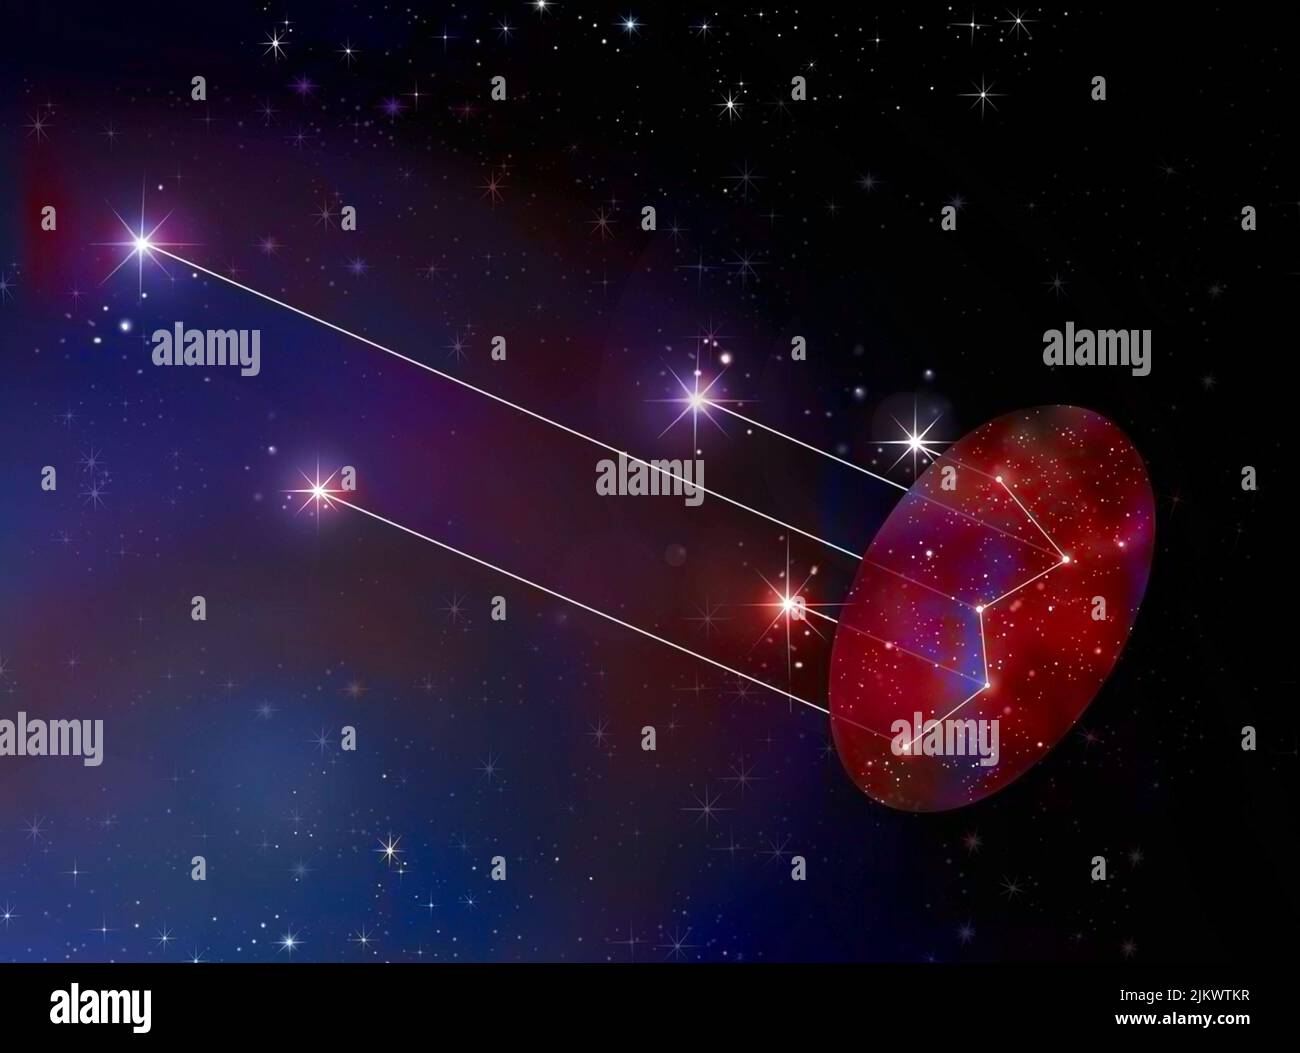 Constellation Cassiopeia on a map and how it is arranged in space. Stock Photo